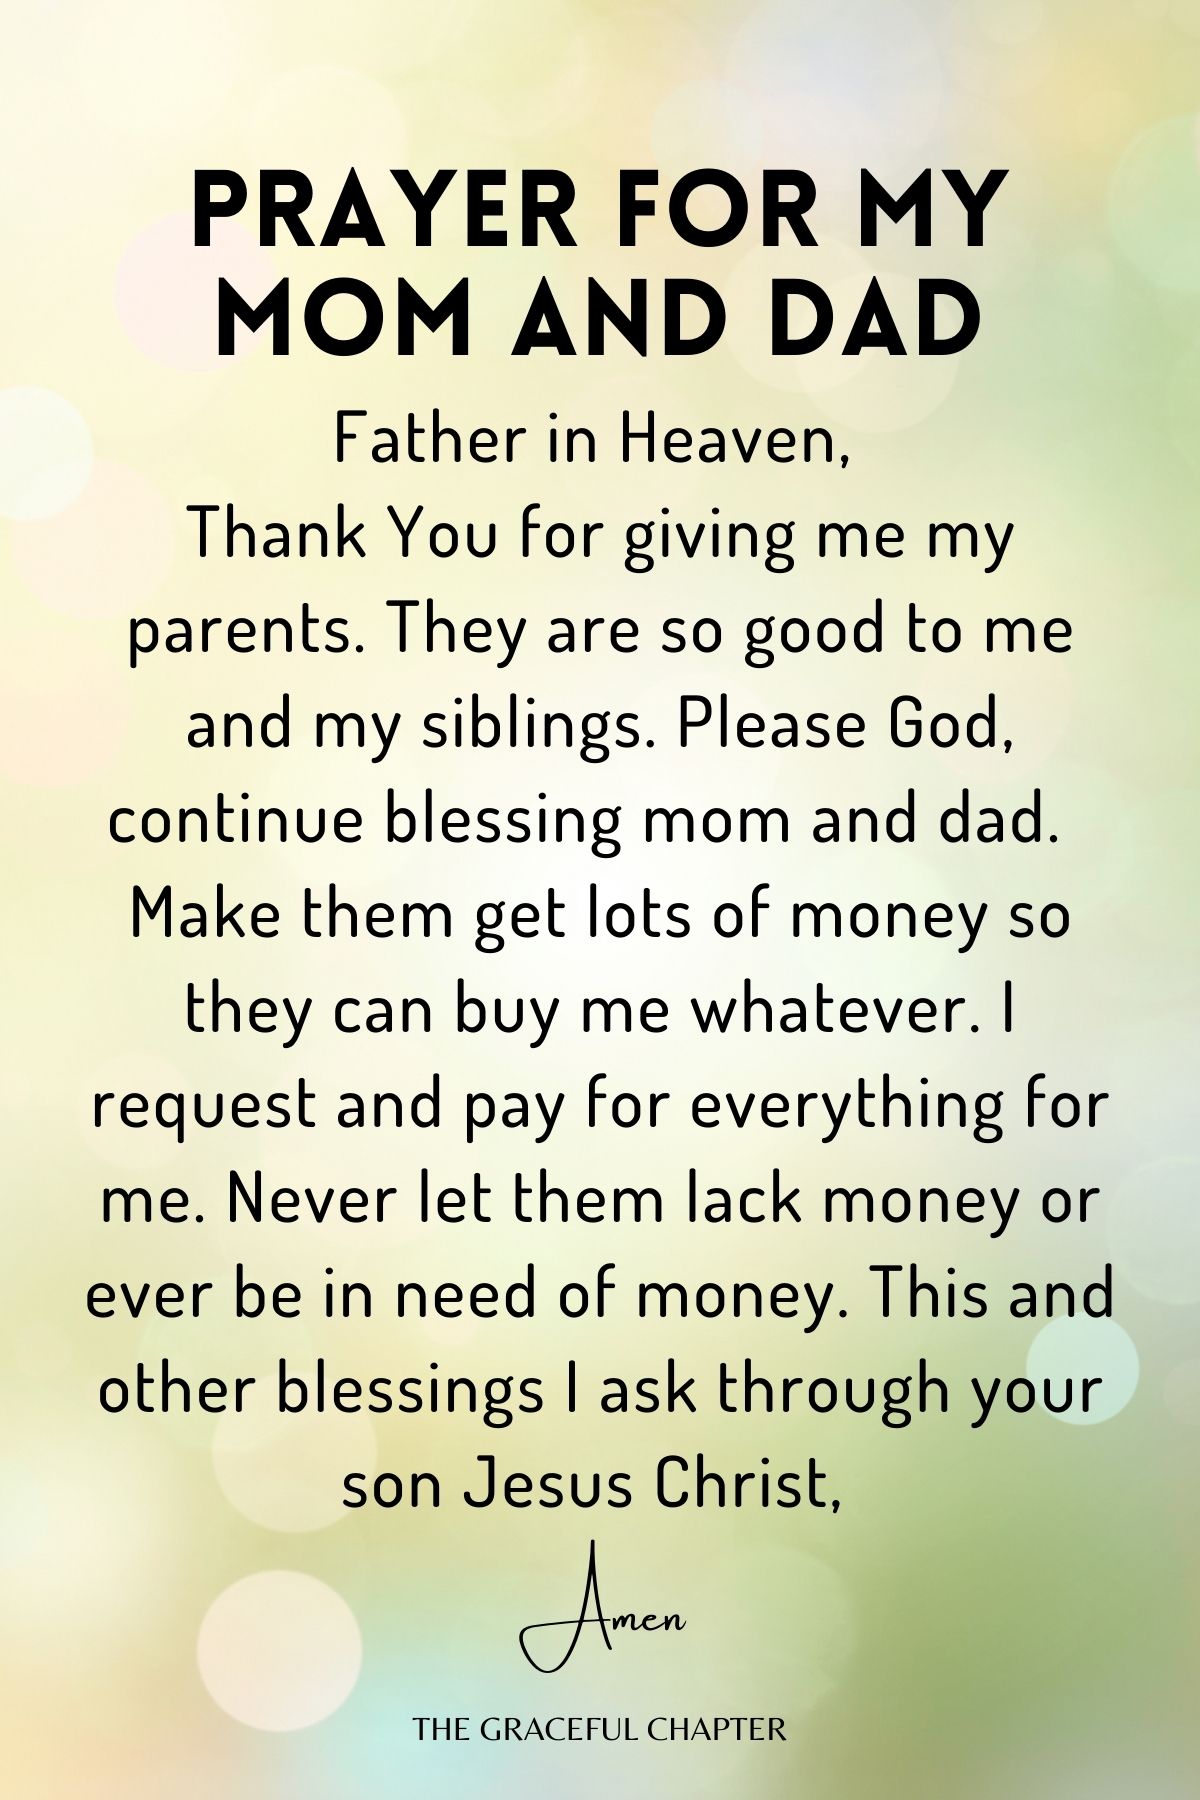 Prayer for my mom and dad